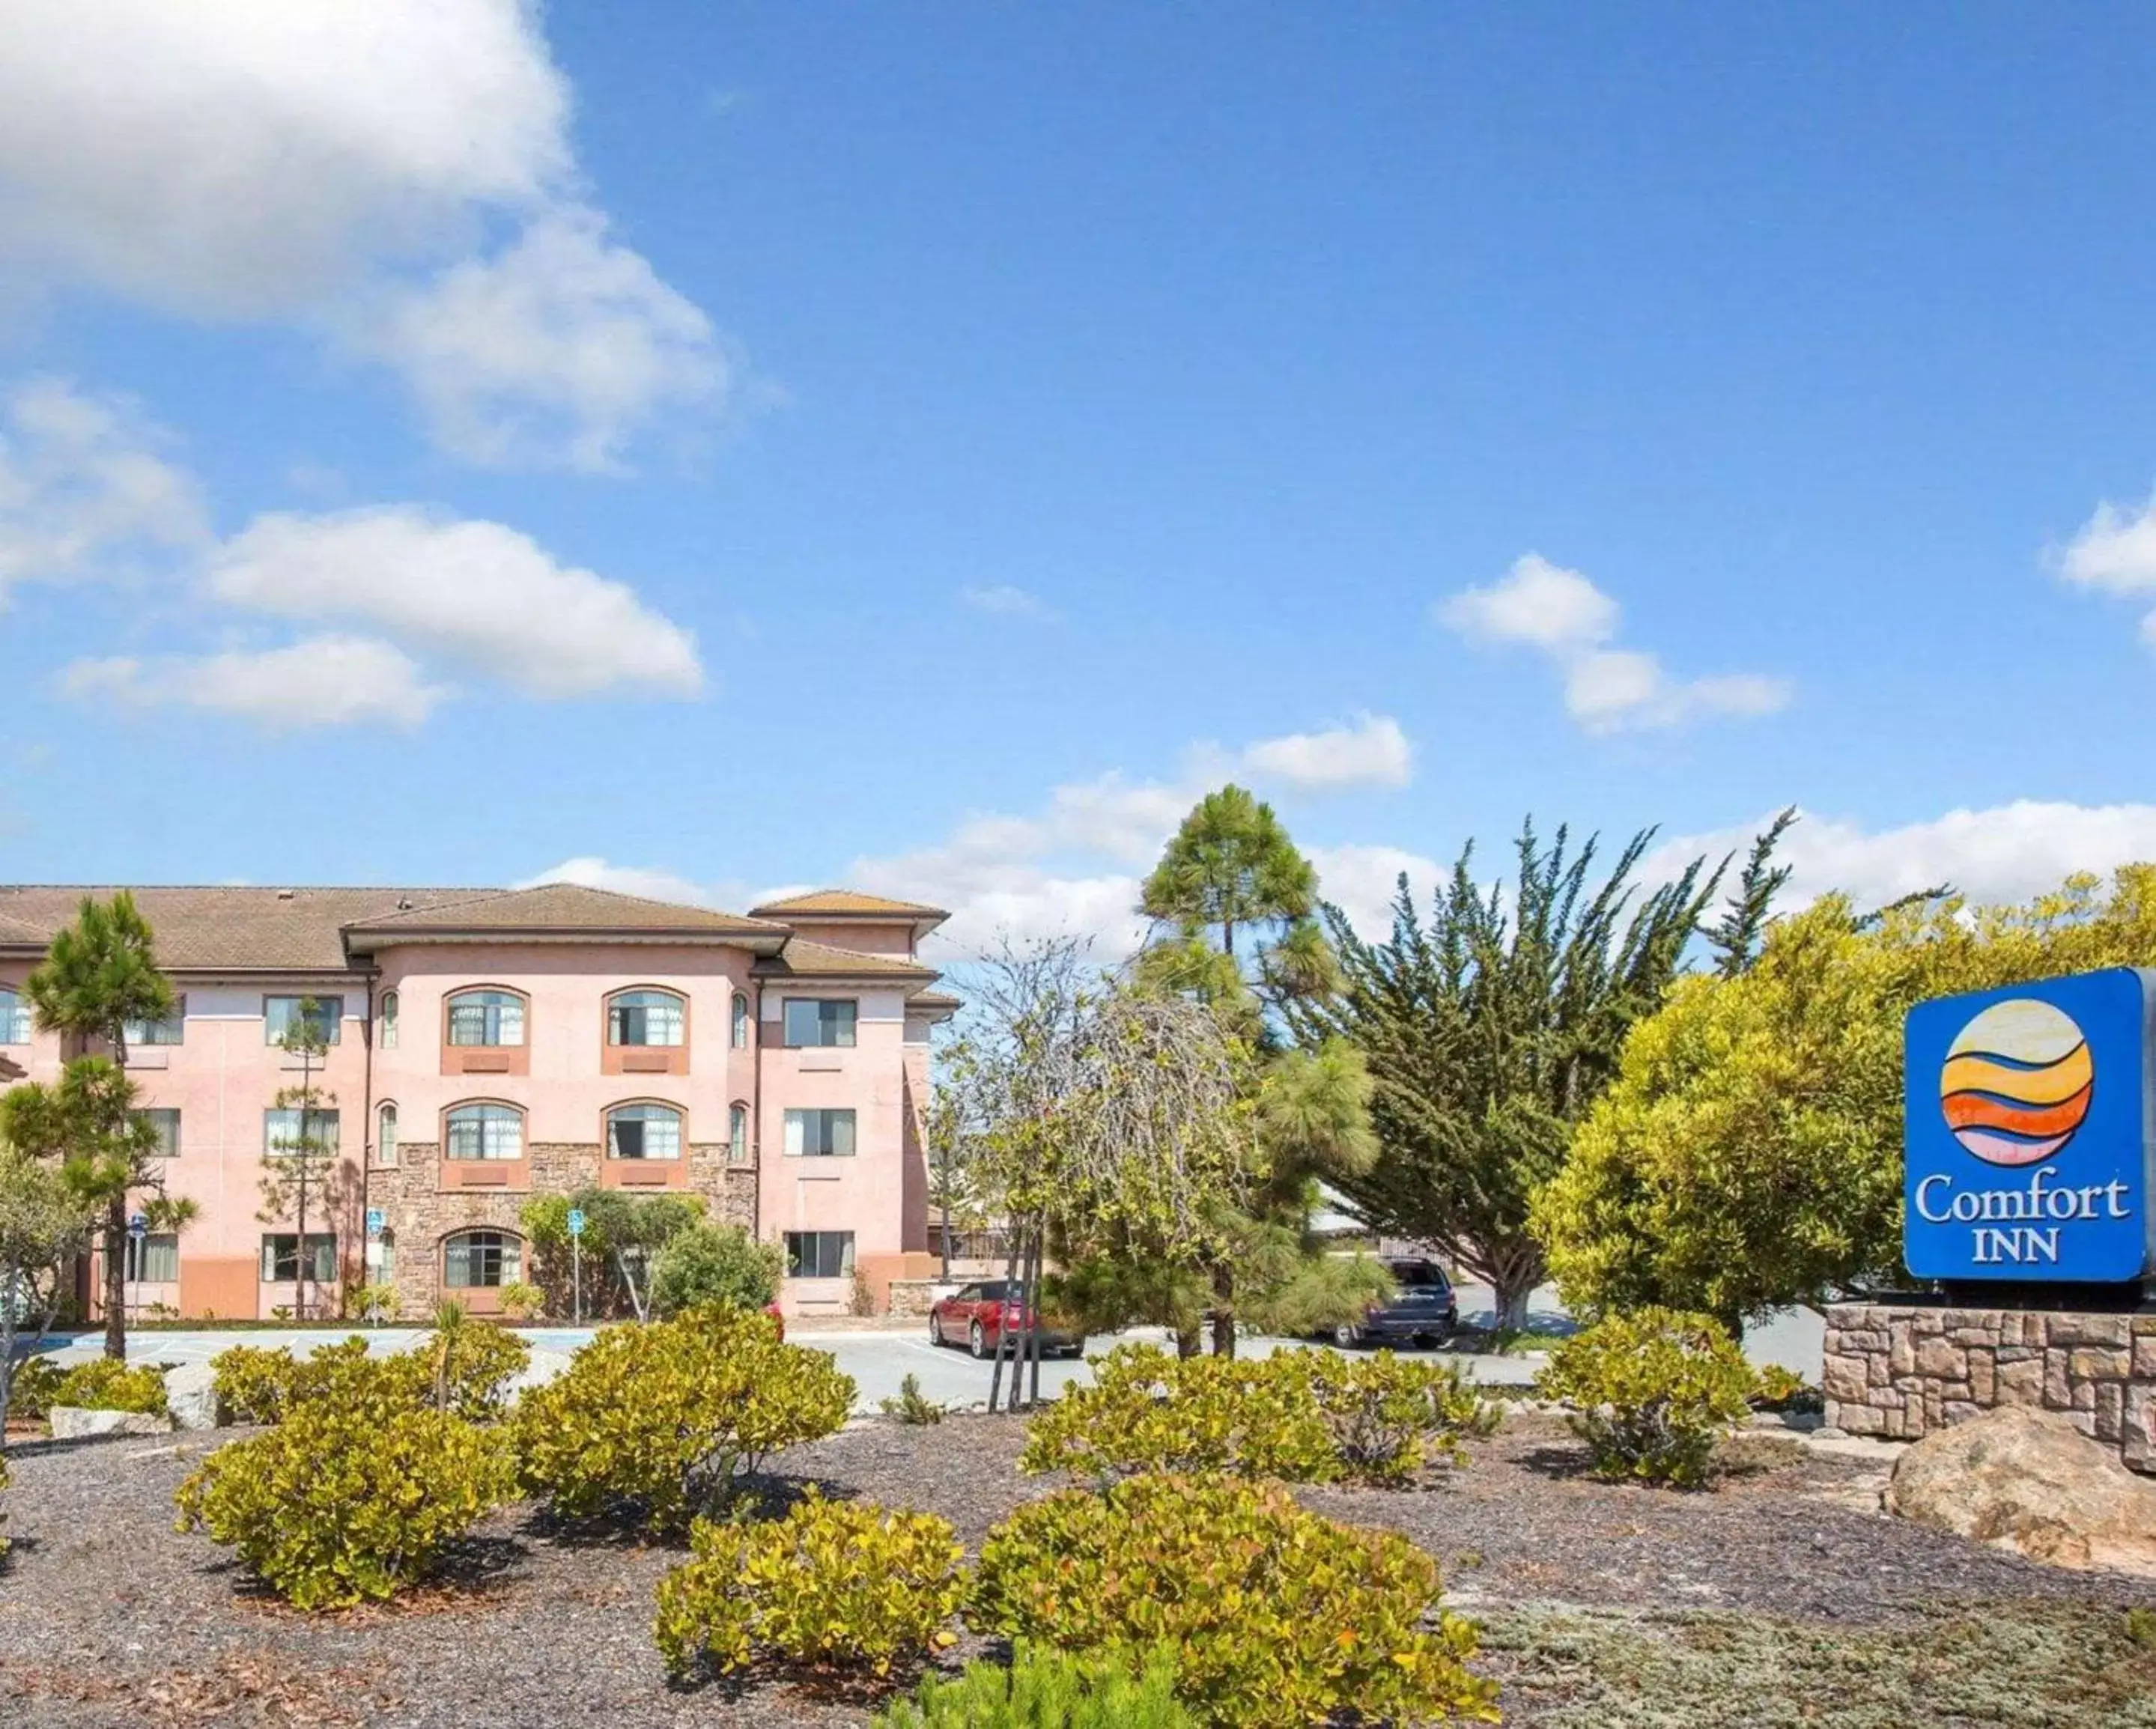 Property Building in Comfort Inn Marina on the Monterey Bay